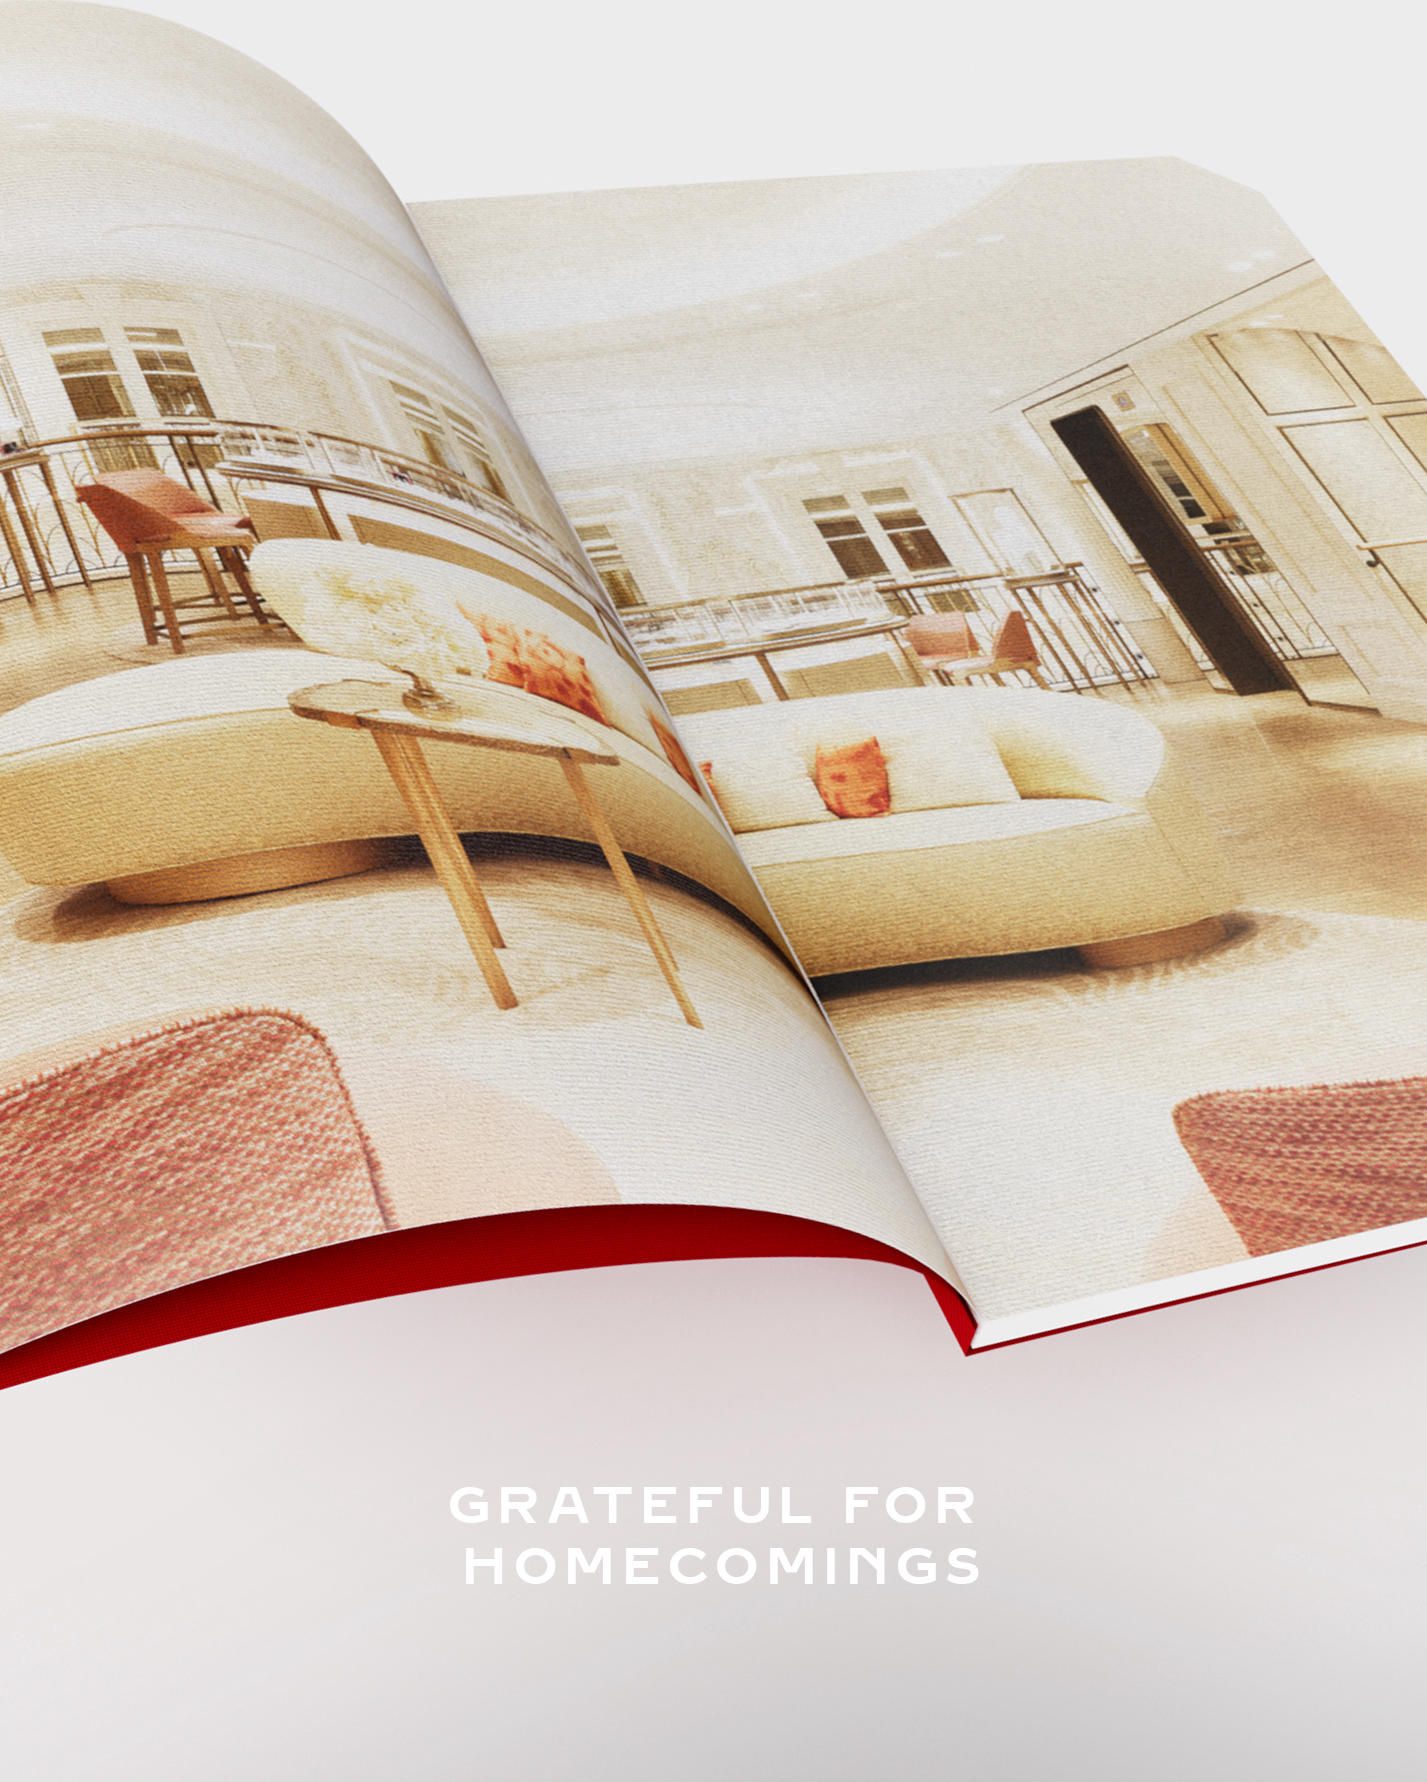 Cartier Official - The Maison begins the year in gratitude – by looking back on the brighter moments